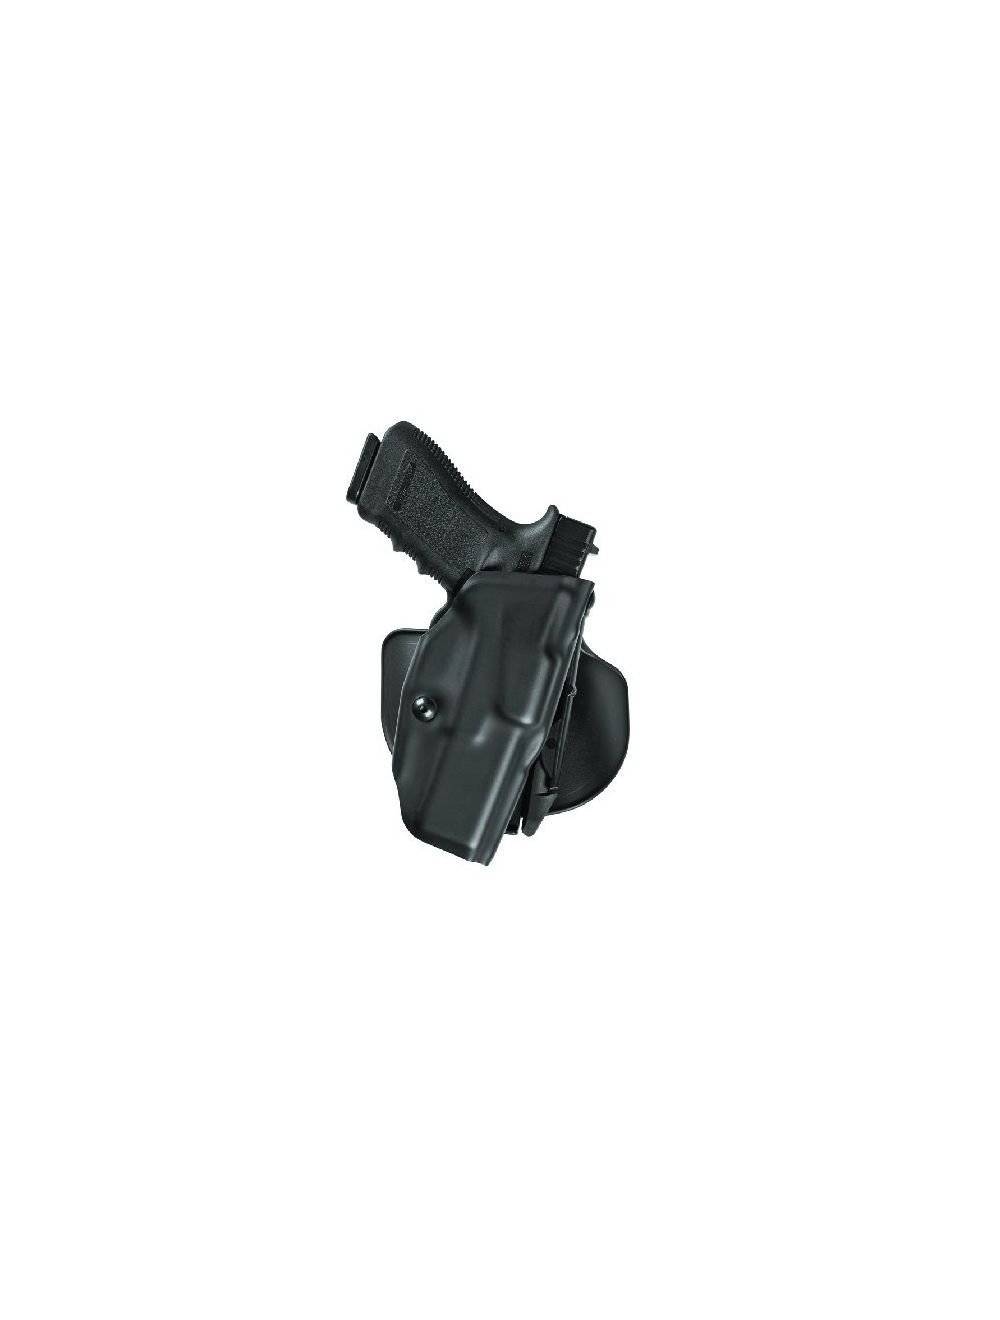 Model 6378 ALS Concealment Paddle Holster w/ Belt Loop for Smith & Wesson 5946